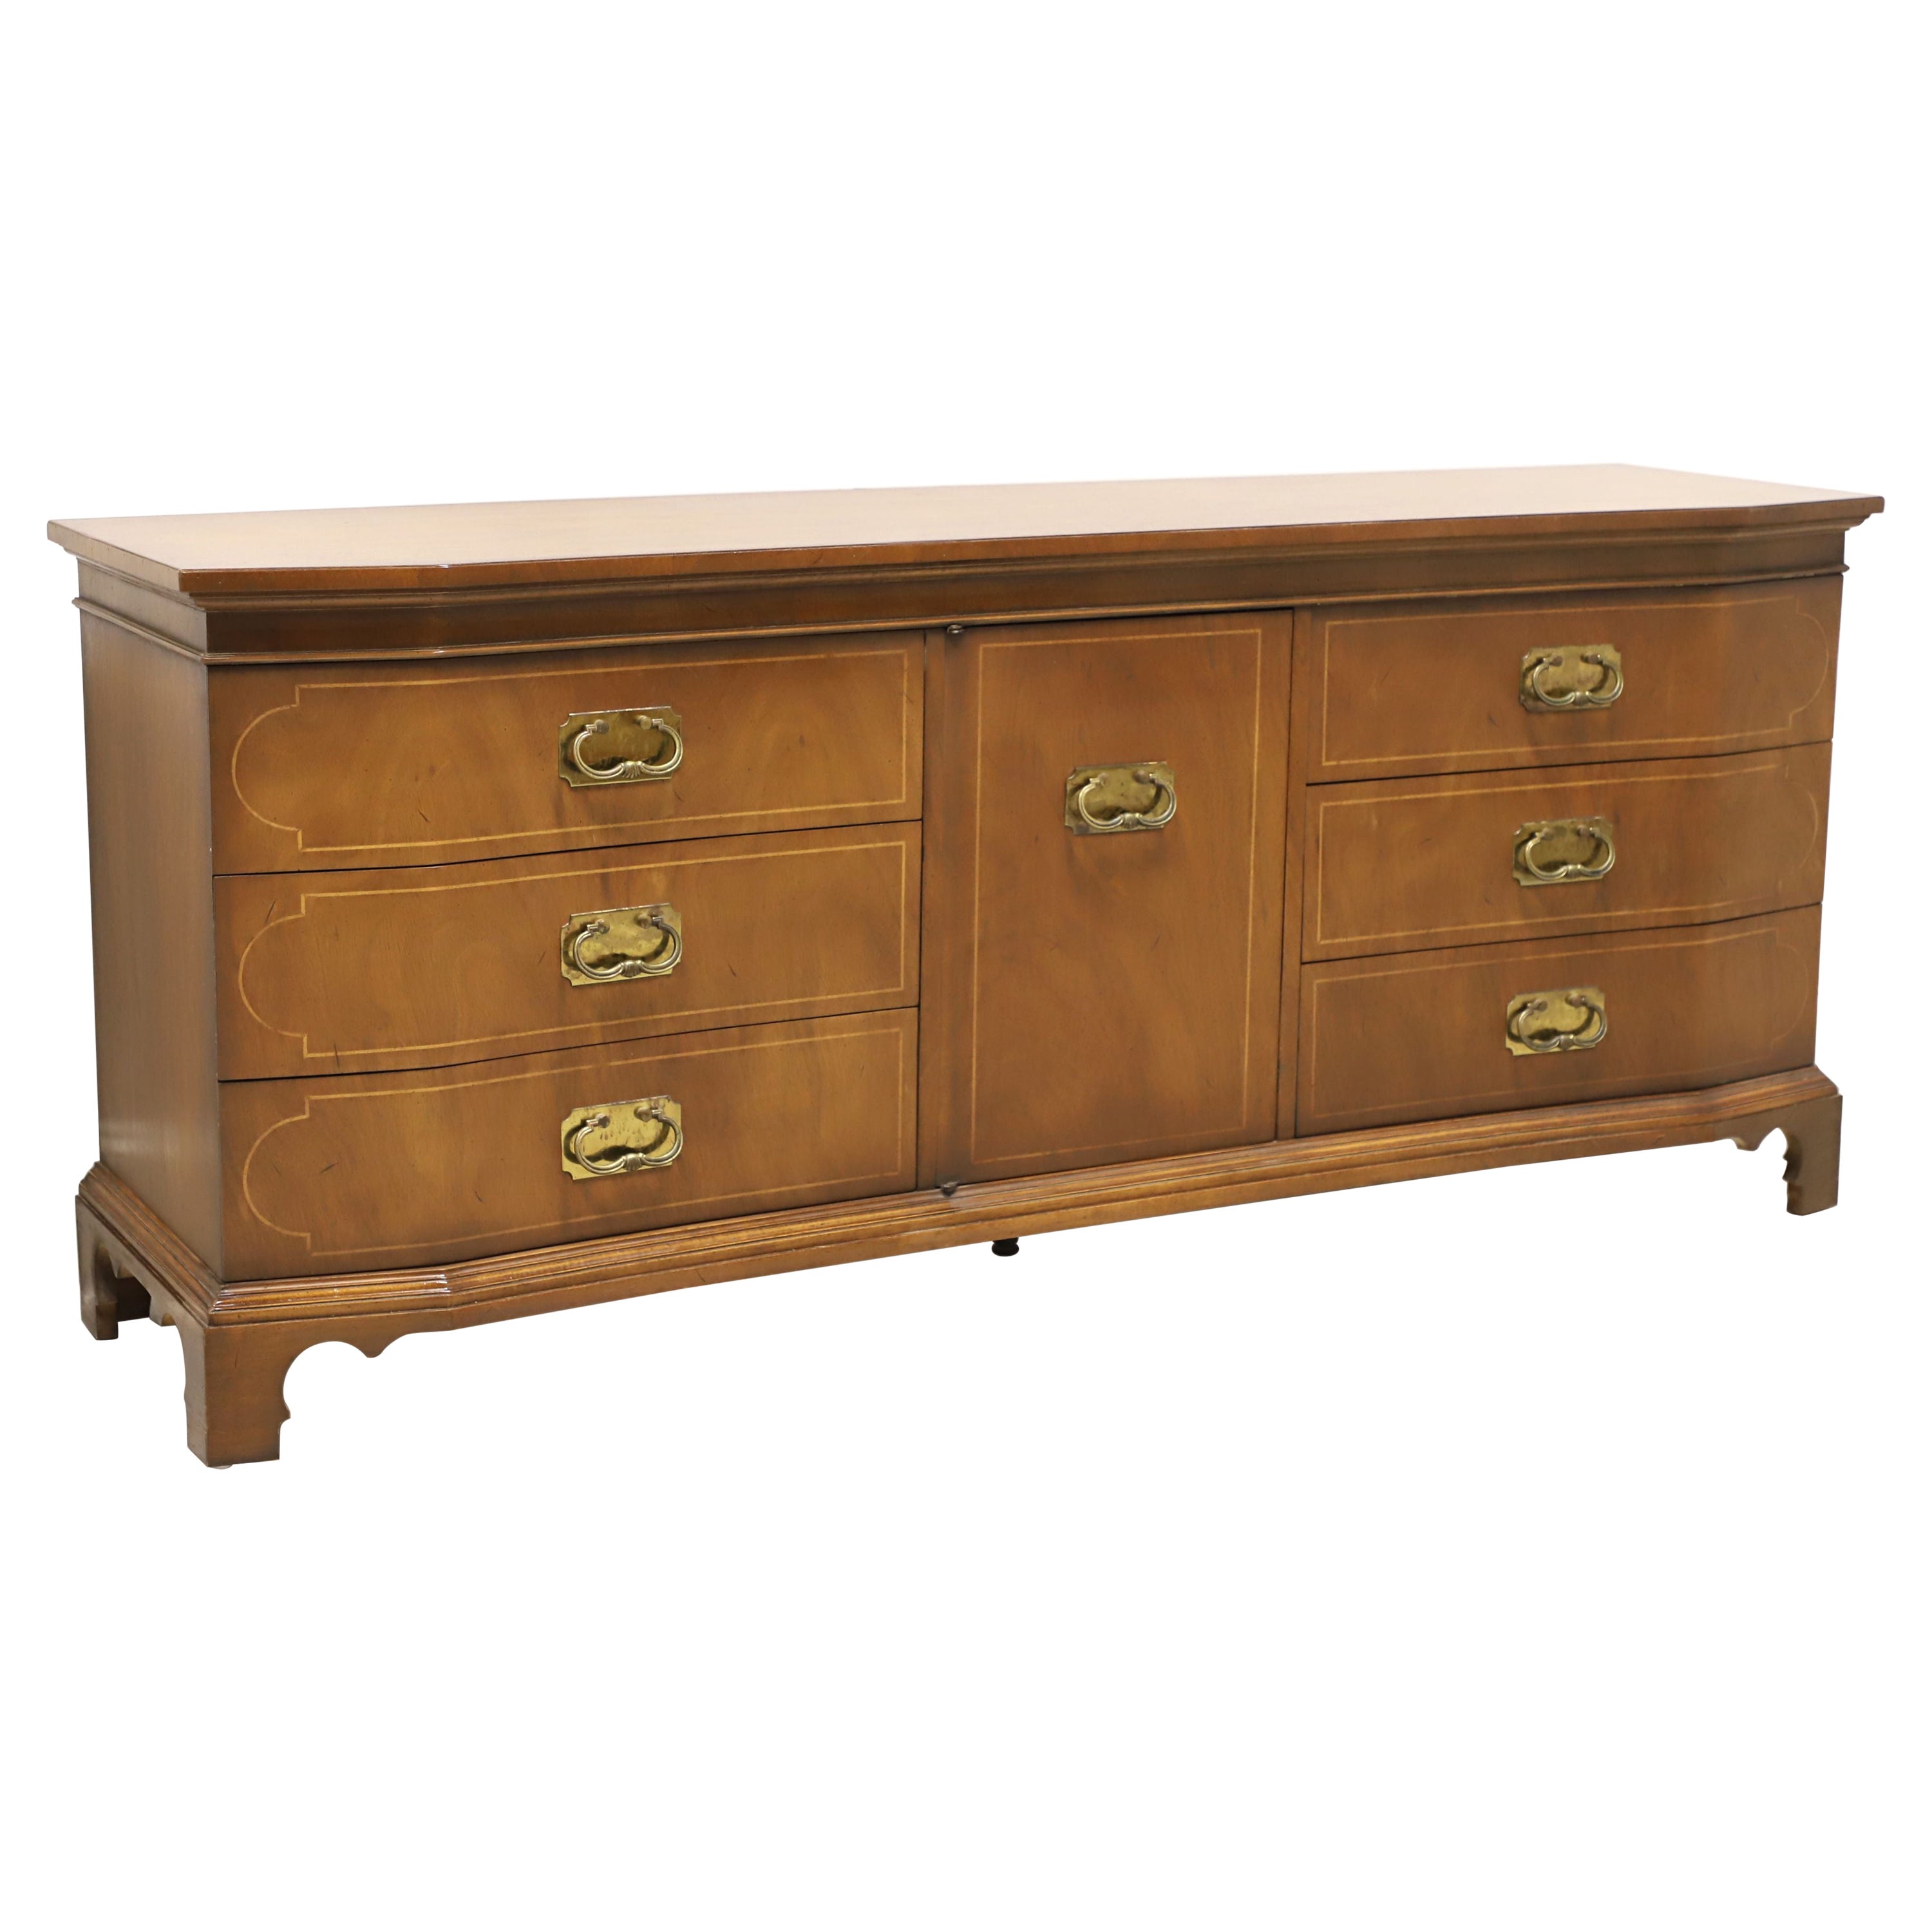 TOMLINSON 1960's Asian Inspired Triple Dresser with String Inlay For Sale